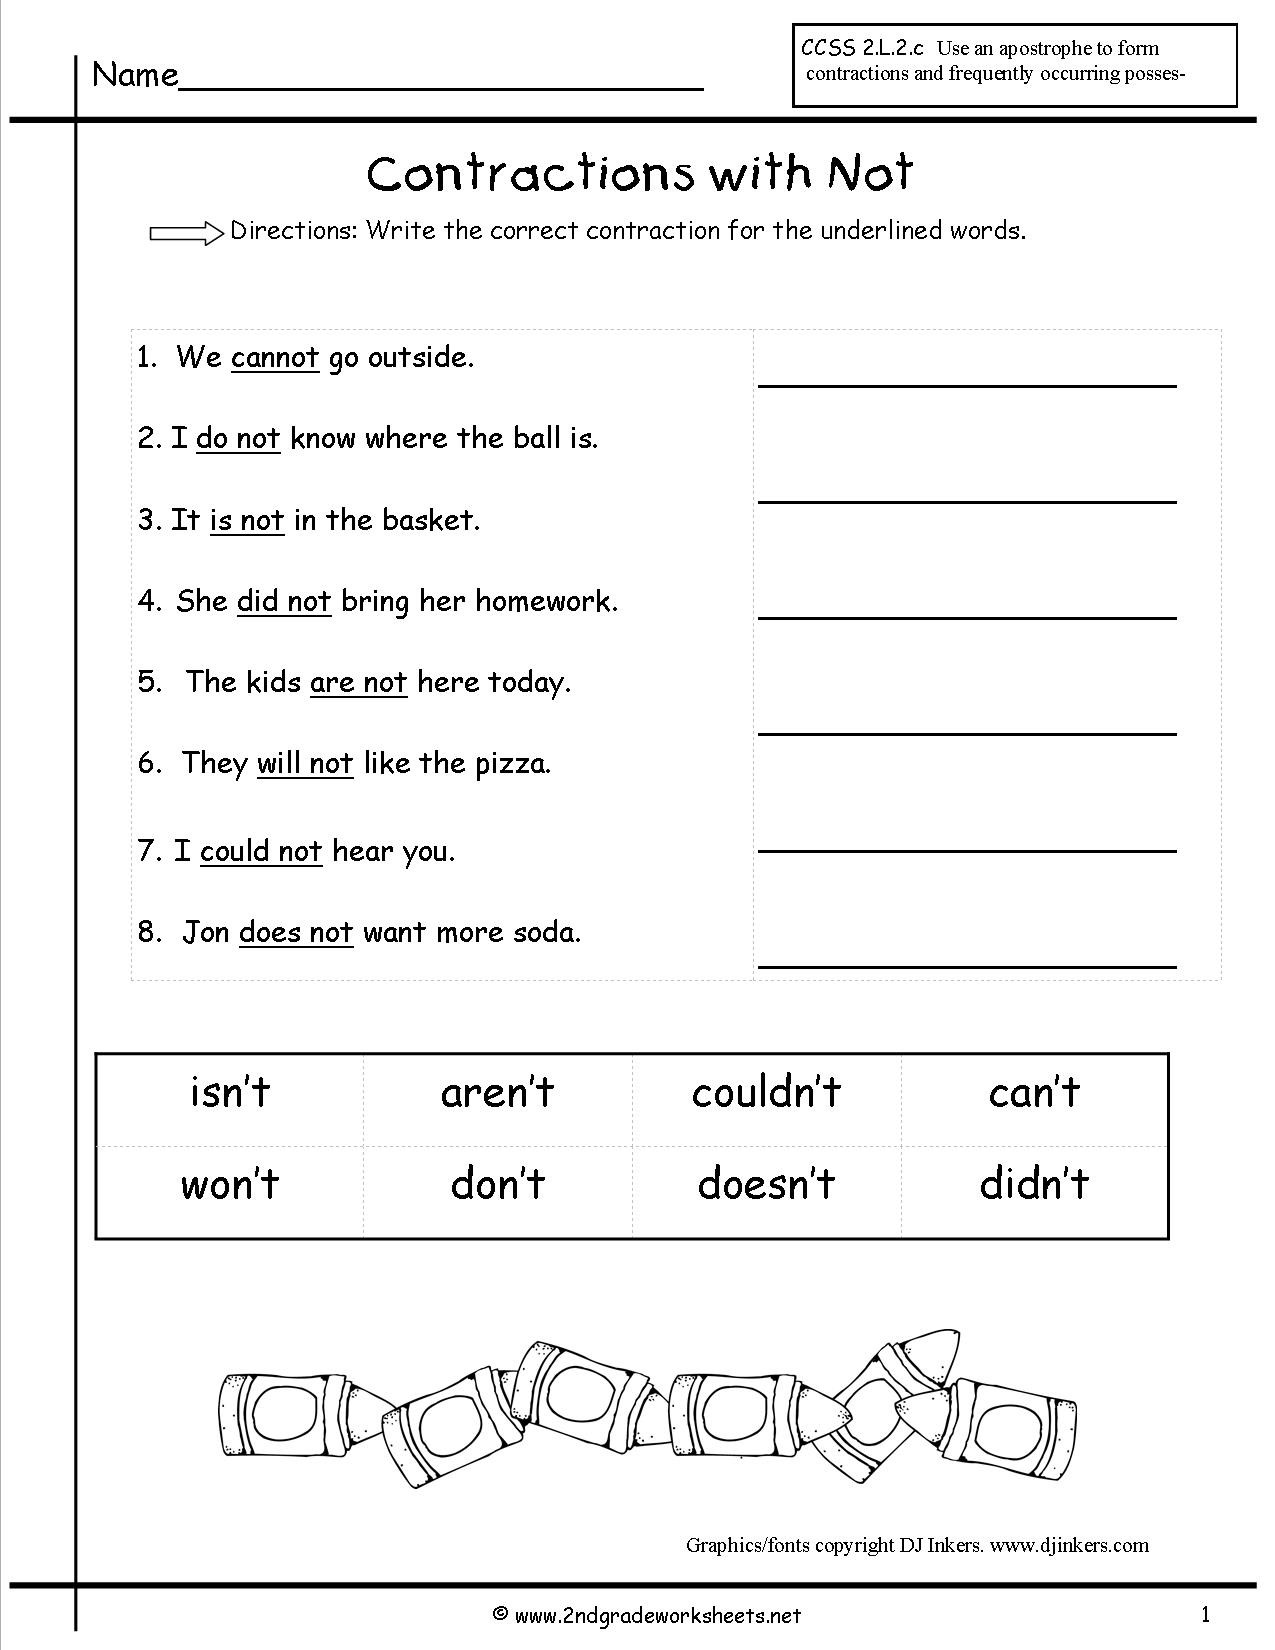 Contractions Worksheet 2nd Grade Free Contractions Worksheets and Printouts Contraction 3rd